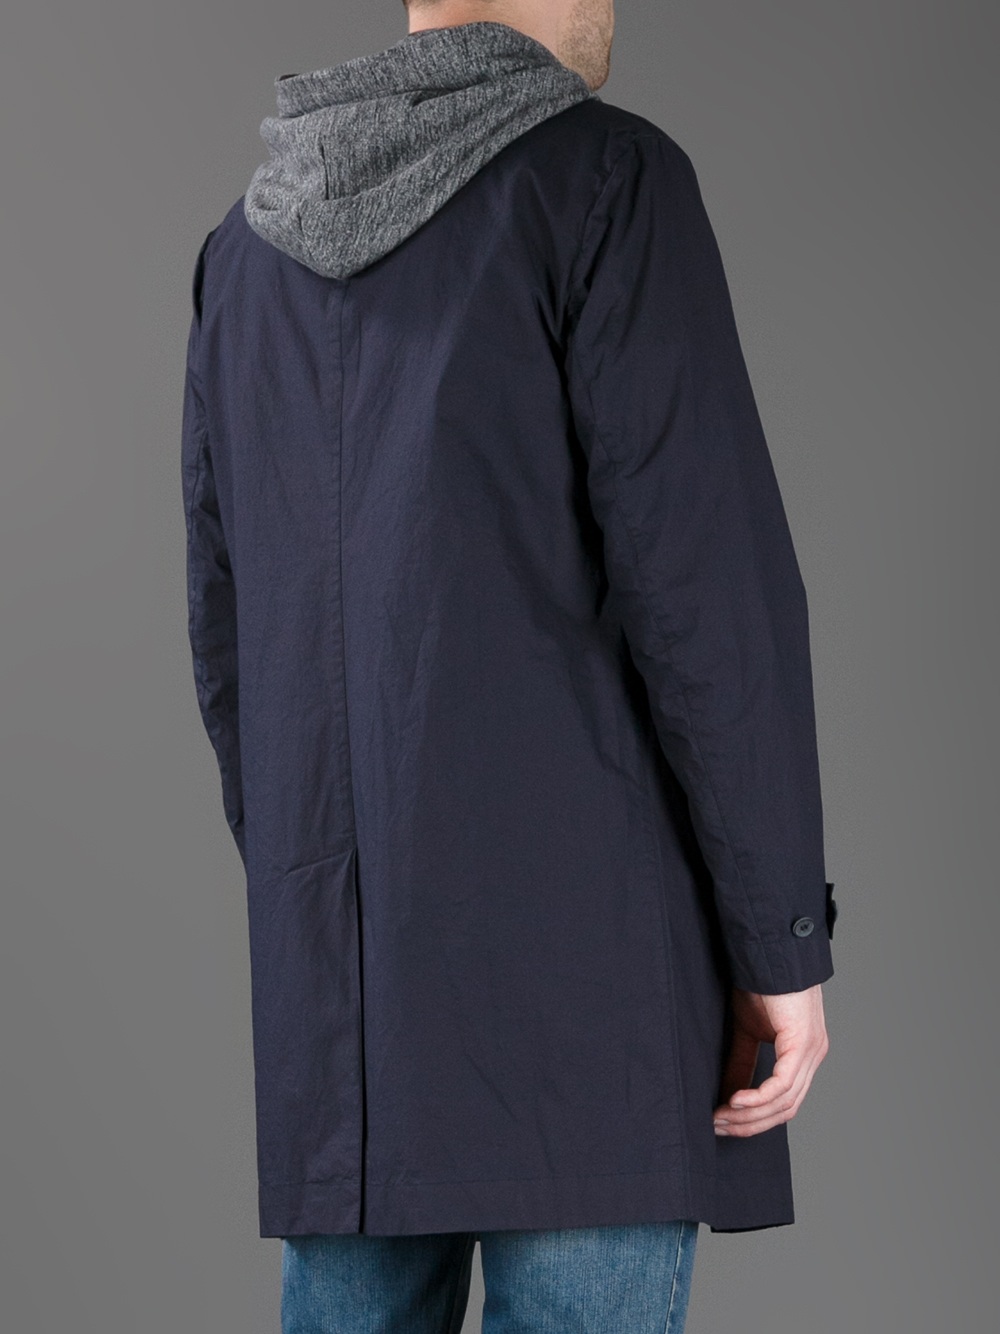 Lyst - Mauro Grifoni Oversized Trench Coat in Blue for Men